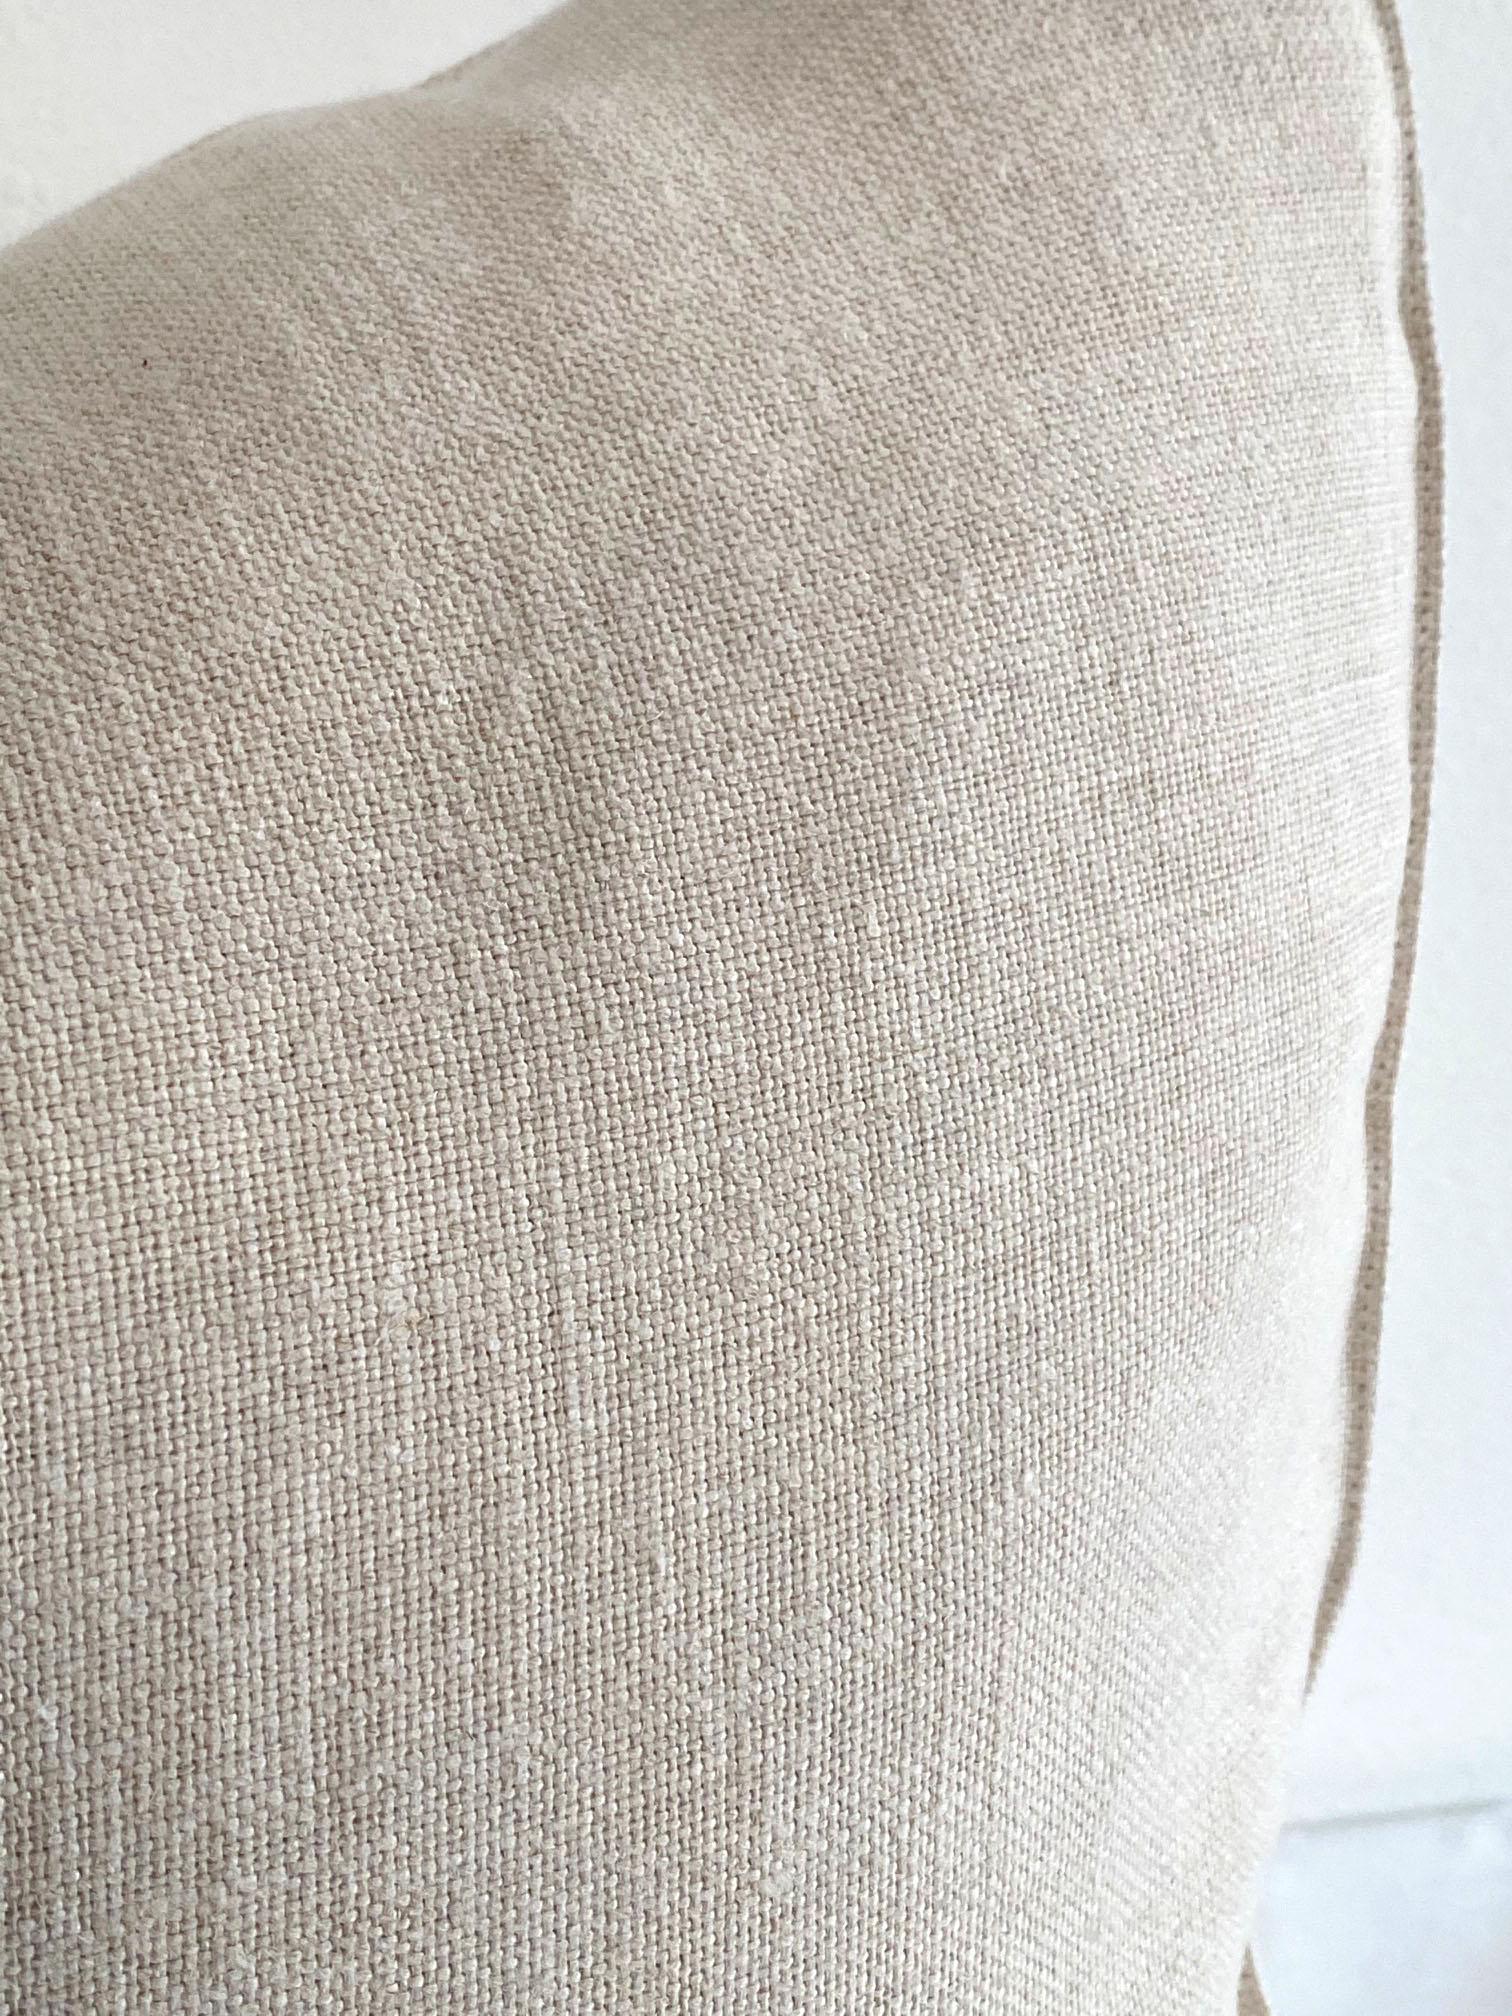 100% pure natural linen accent pillow cover
Size: 20 x 20
Insert not included
Envelope style closure.
 